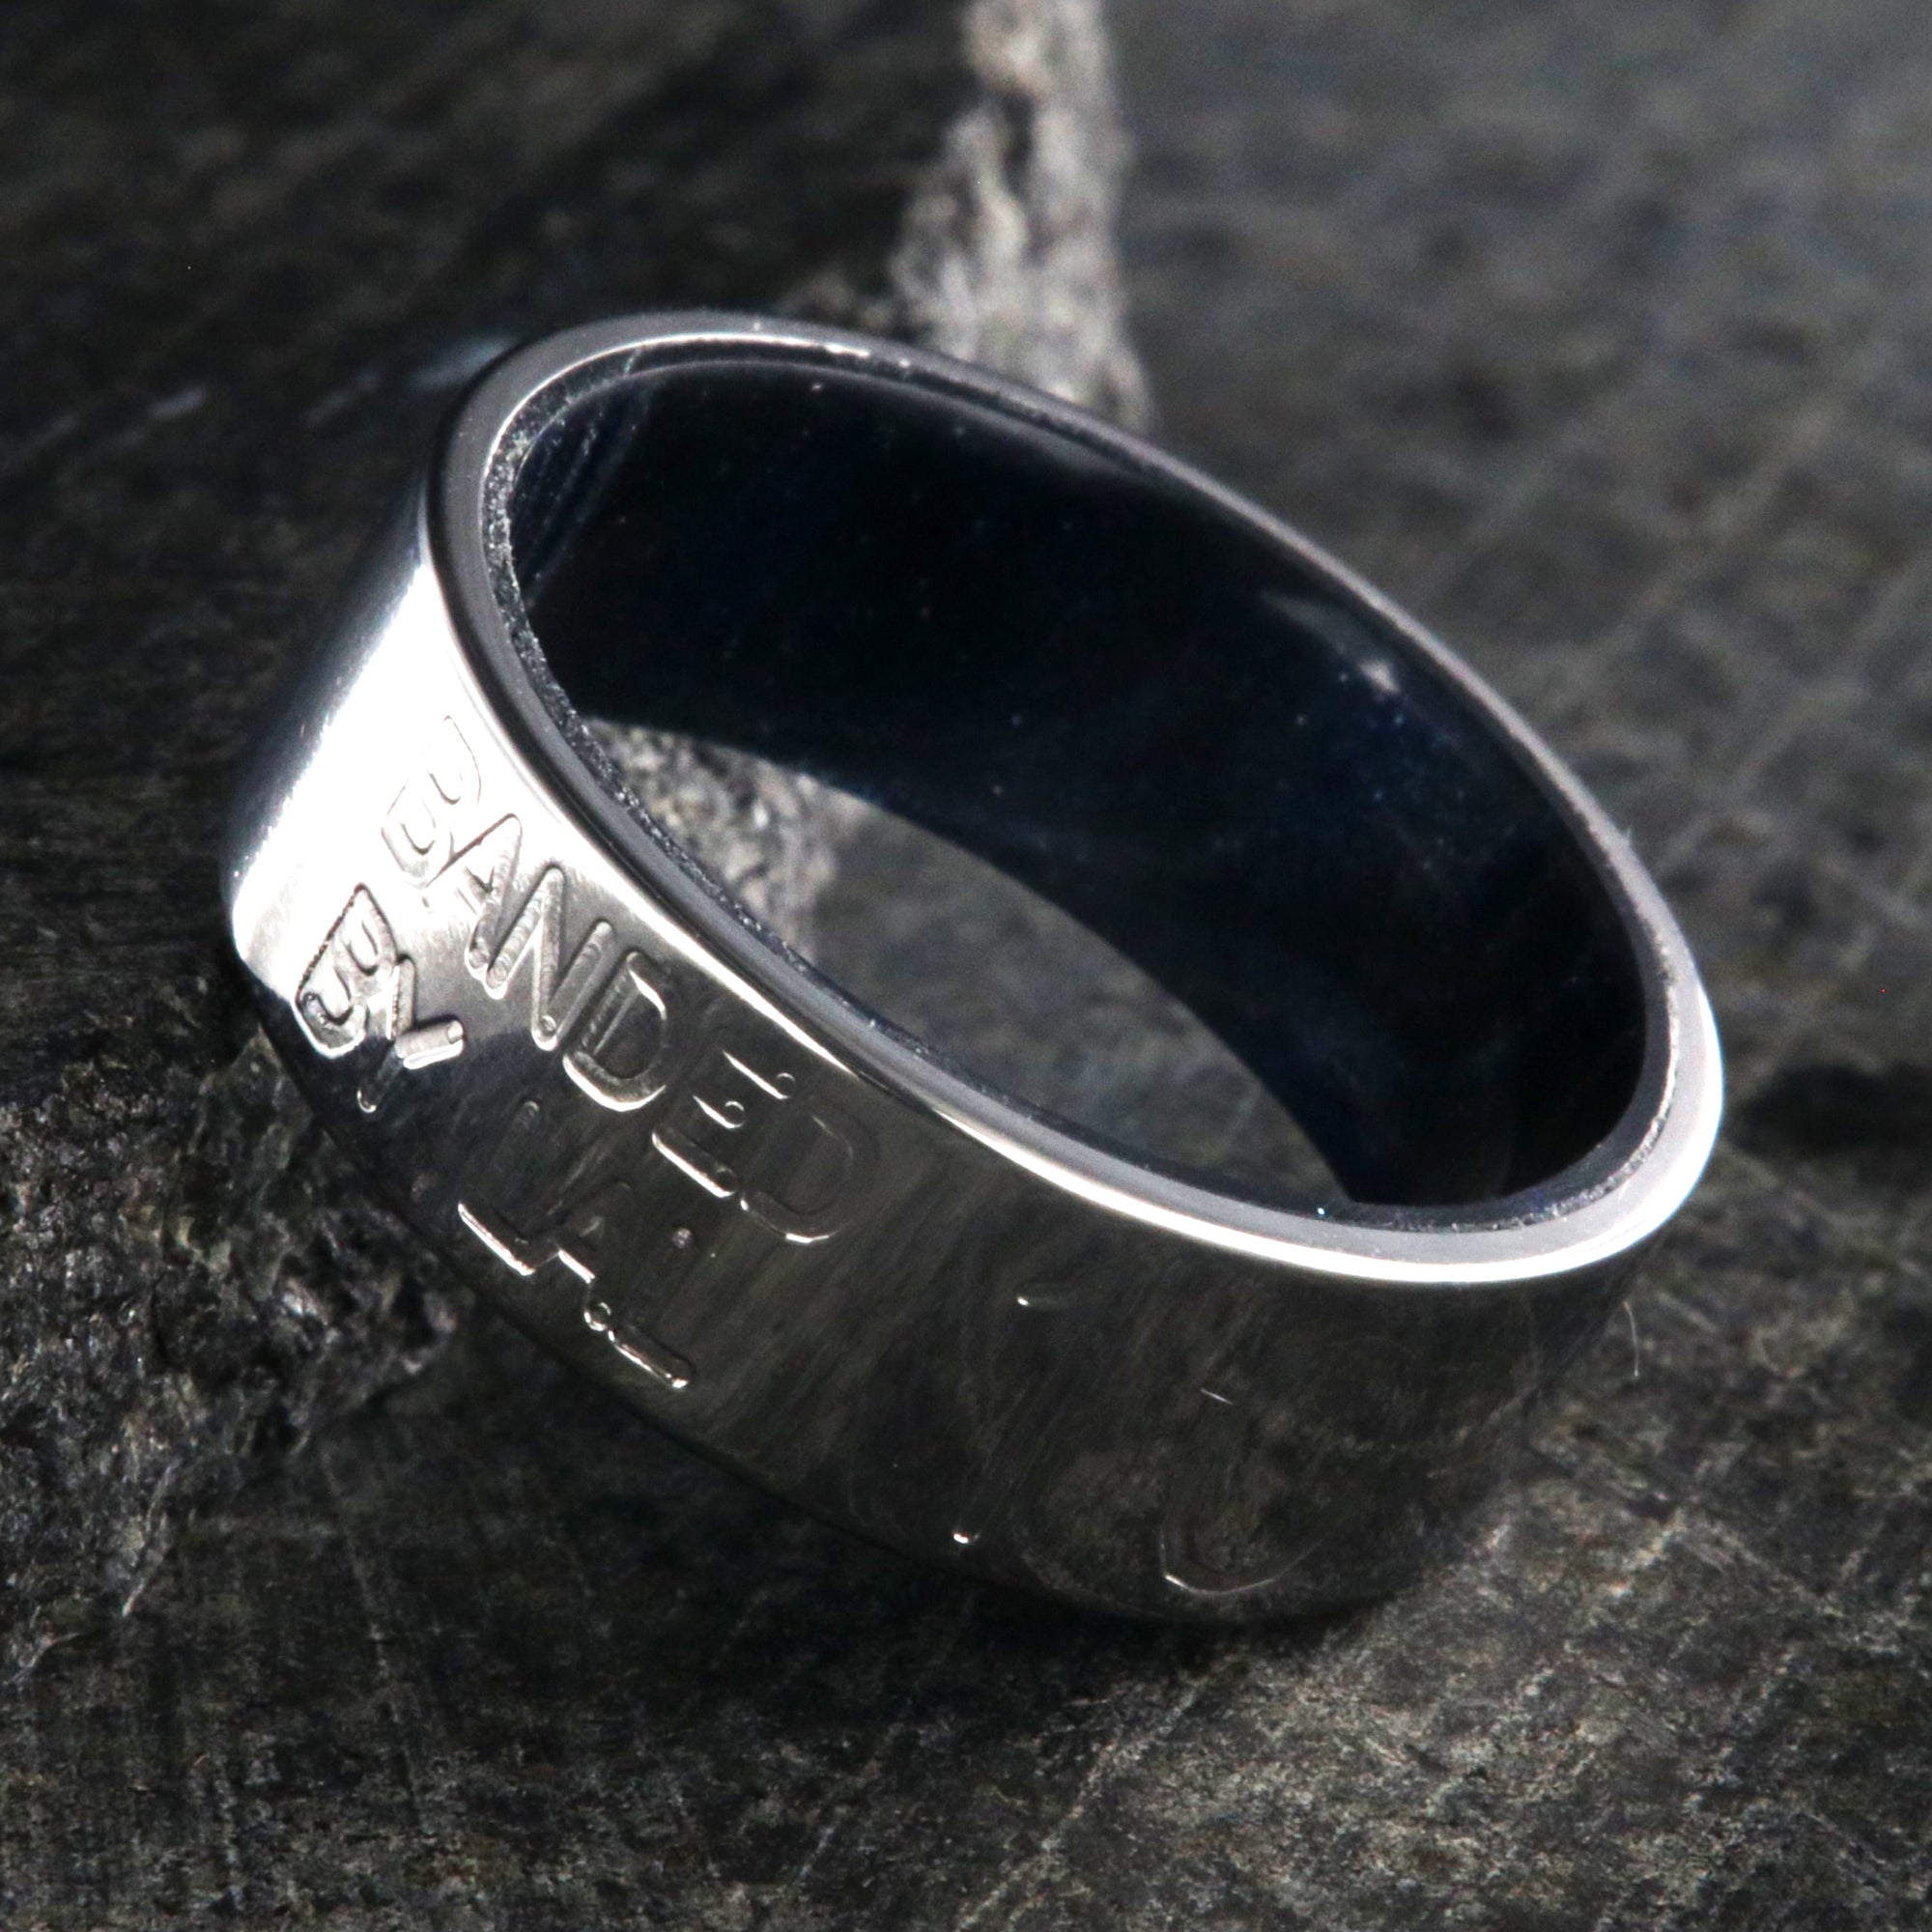 8mm wide duck band titanium ring with two lines of text adjacent to large numbers with dark blue sleeve